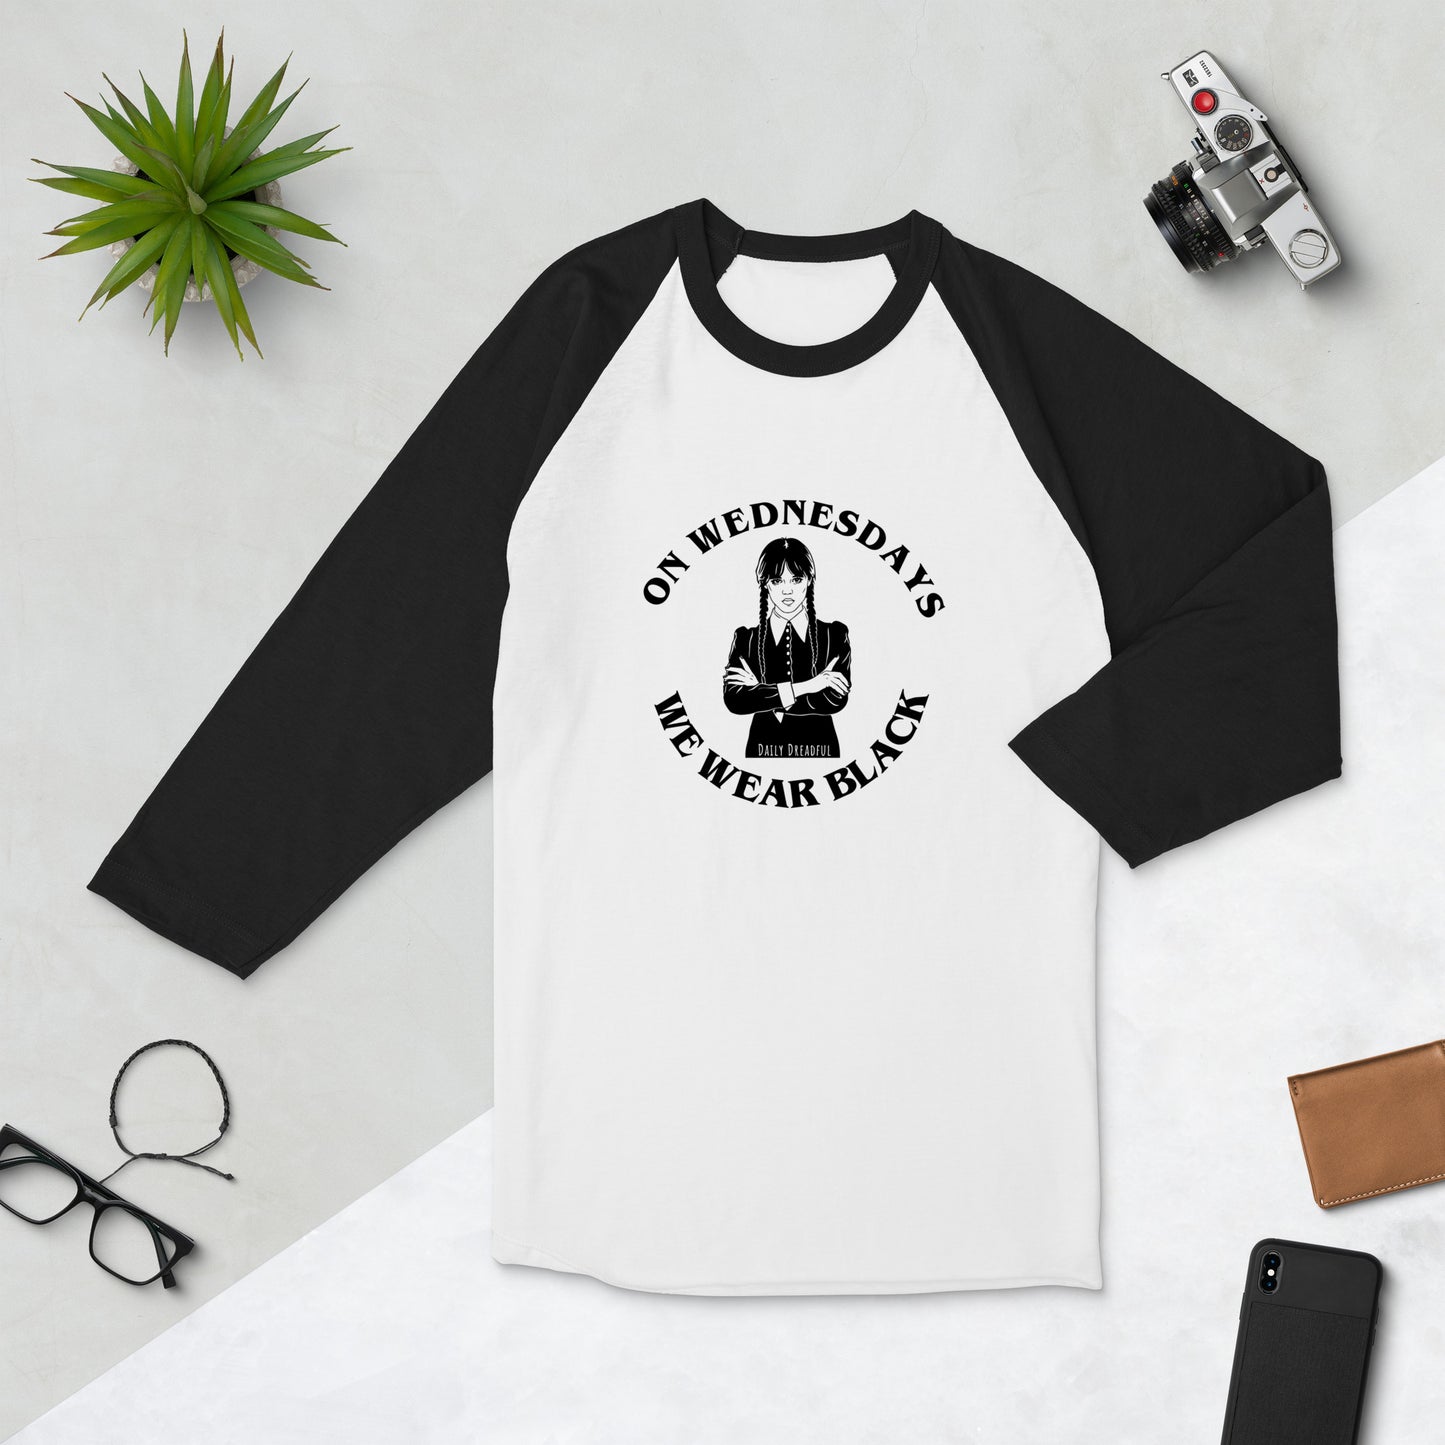 white & black color combo "On Wednesdays We Wear Black" 3/4 sleeve raglan shirt comes from Daily Dreadful